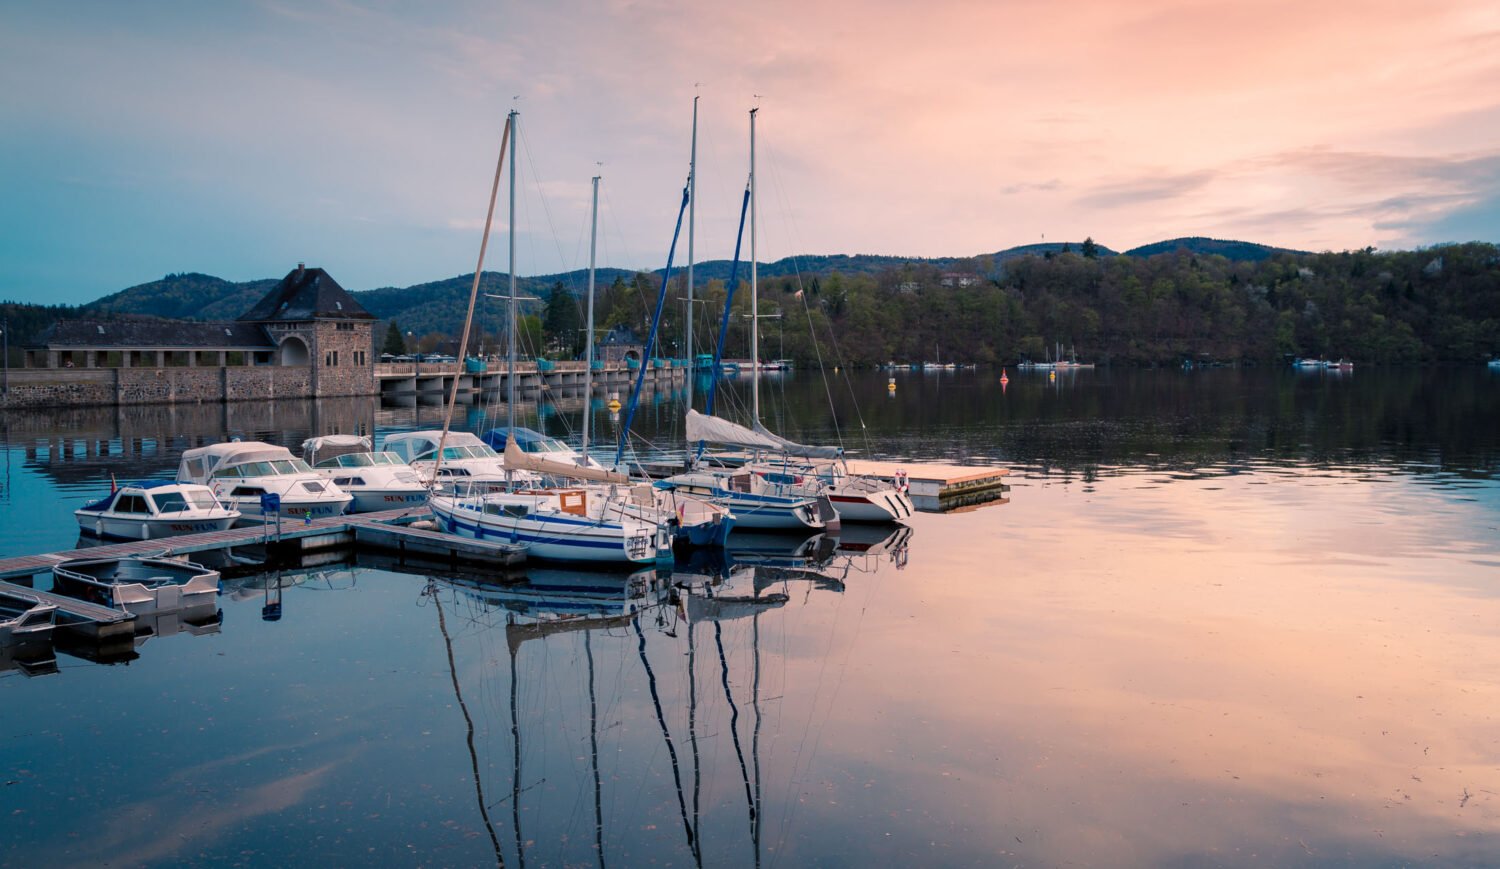 In the evening, when the boats rock in the pink-orange water, colored by the sunlight, the atmosphere at the Edersee is particularly beautiful © Silke Koch - stock.adobe.com